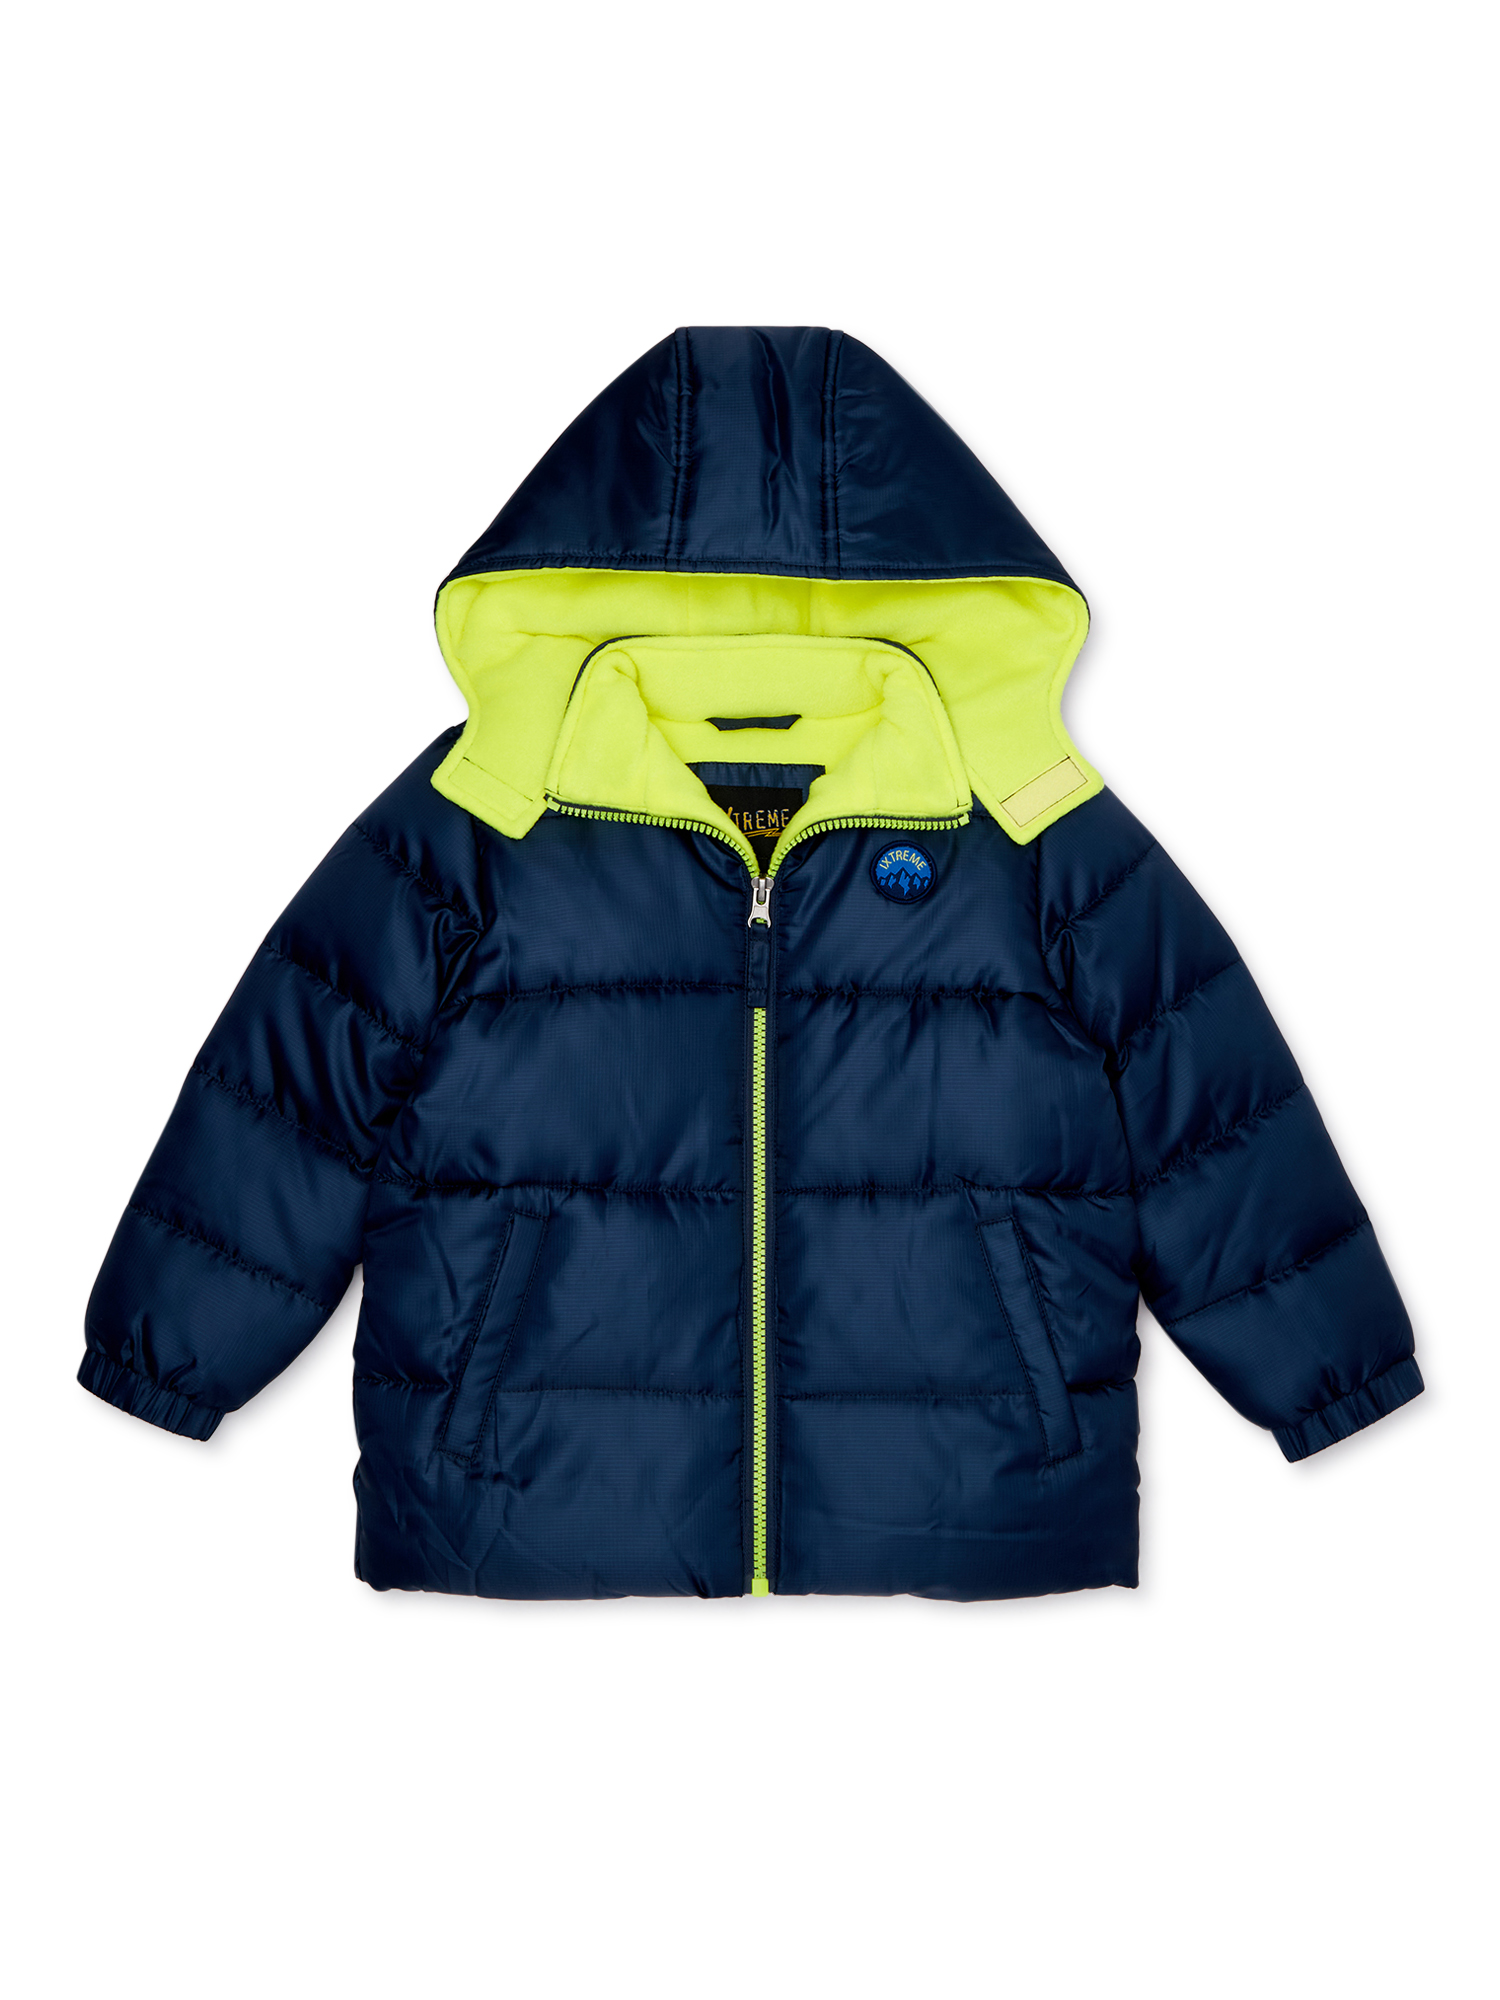 Details about NWT Boys iXtreme puffer ski coat jacket size 10-12 Water ...